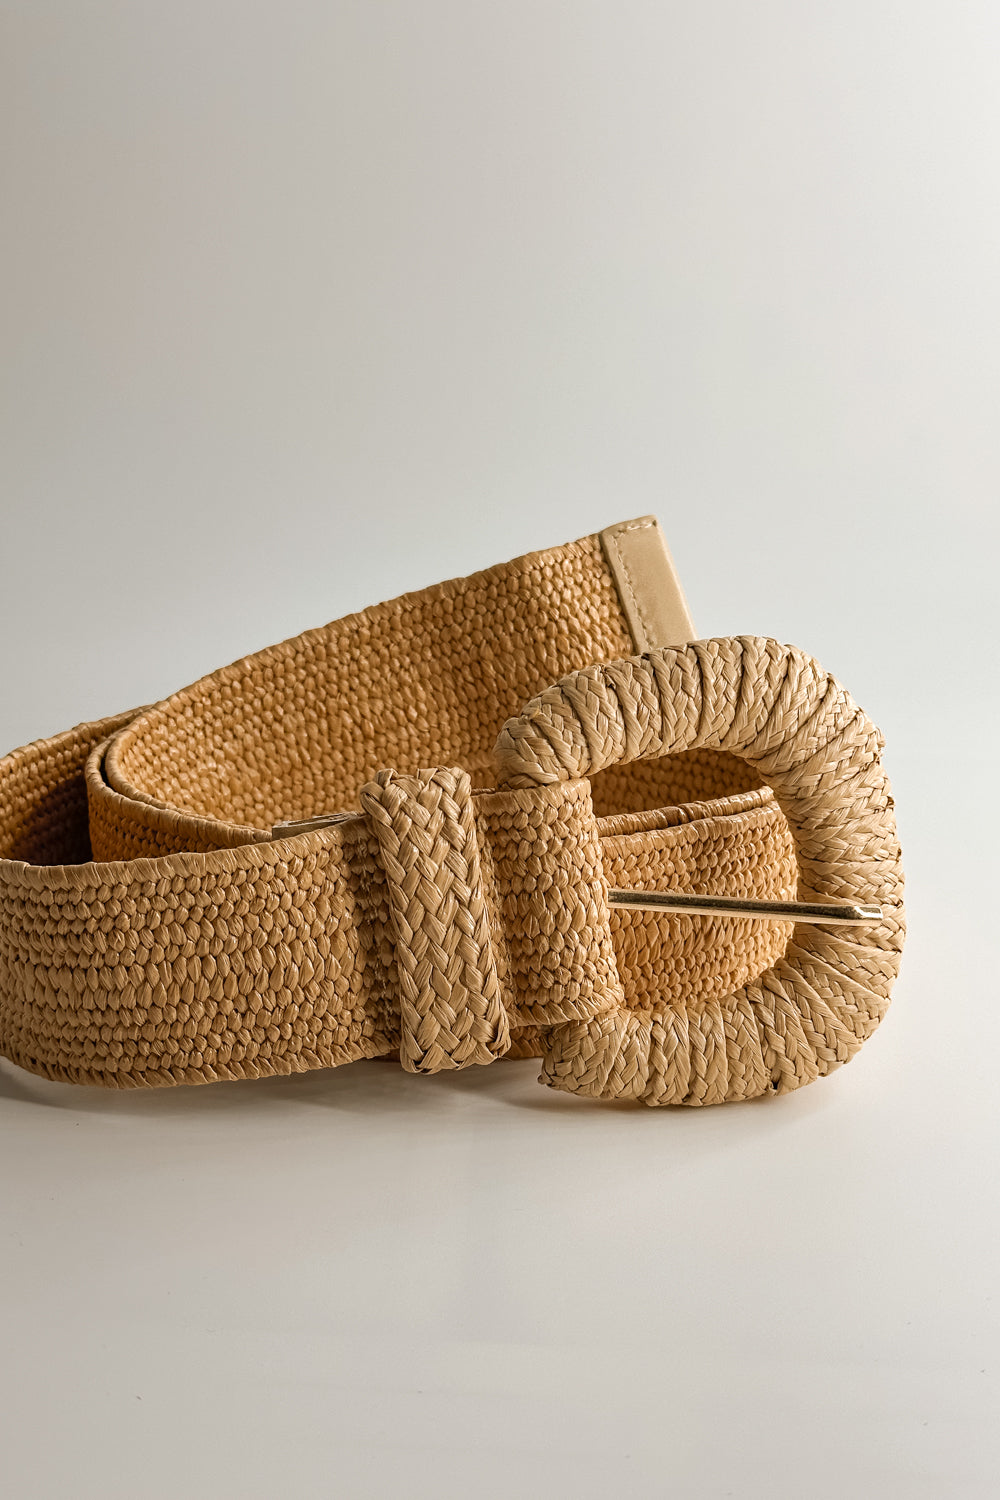 Front view of the Nova Light Tan Rattan Belt which features khaki rattan fabric, monochrome rattan covered adjustable buckle